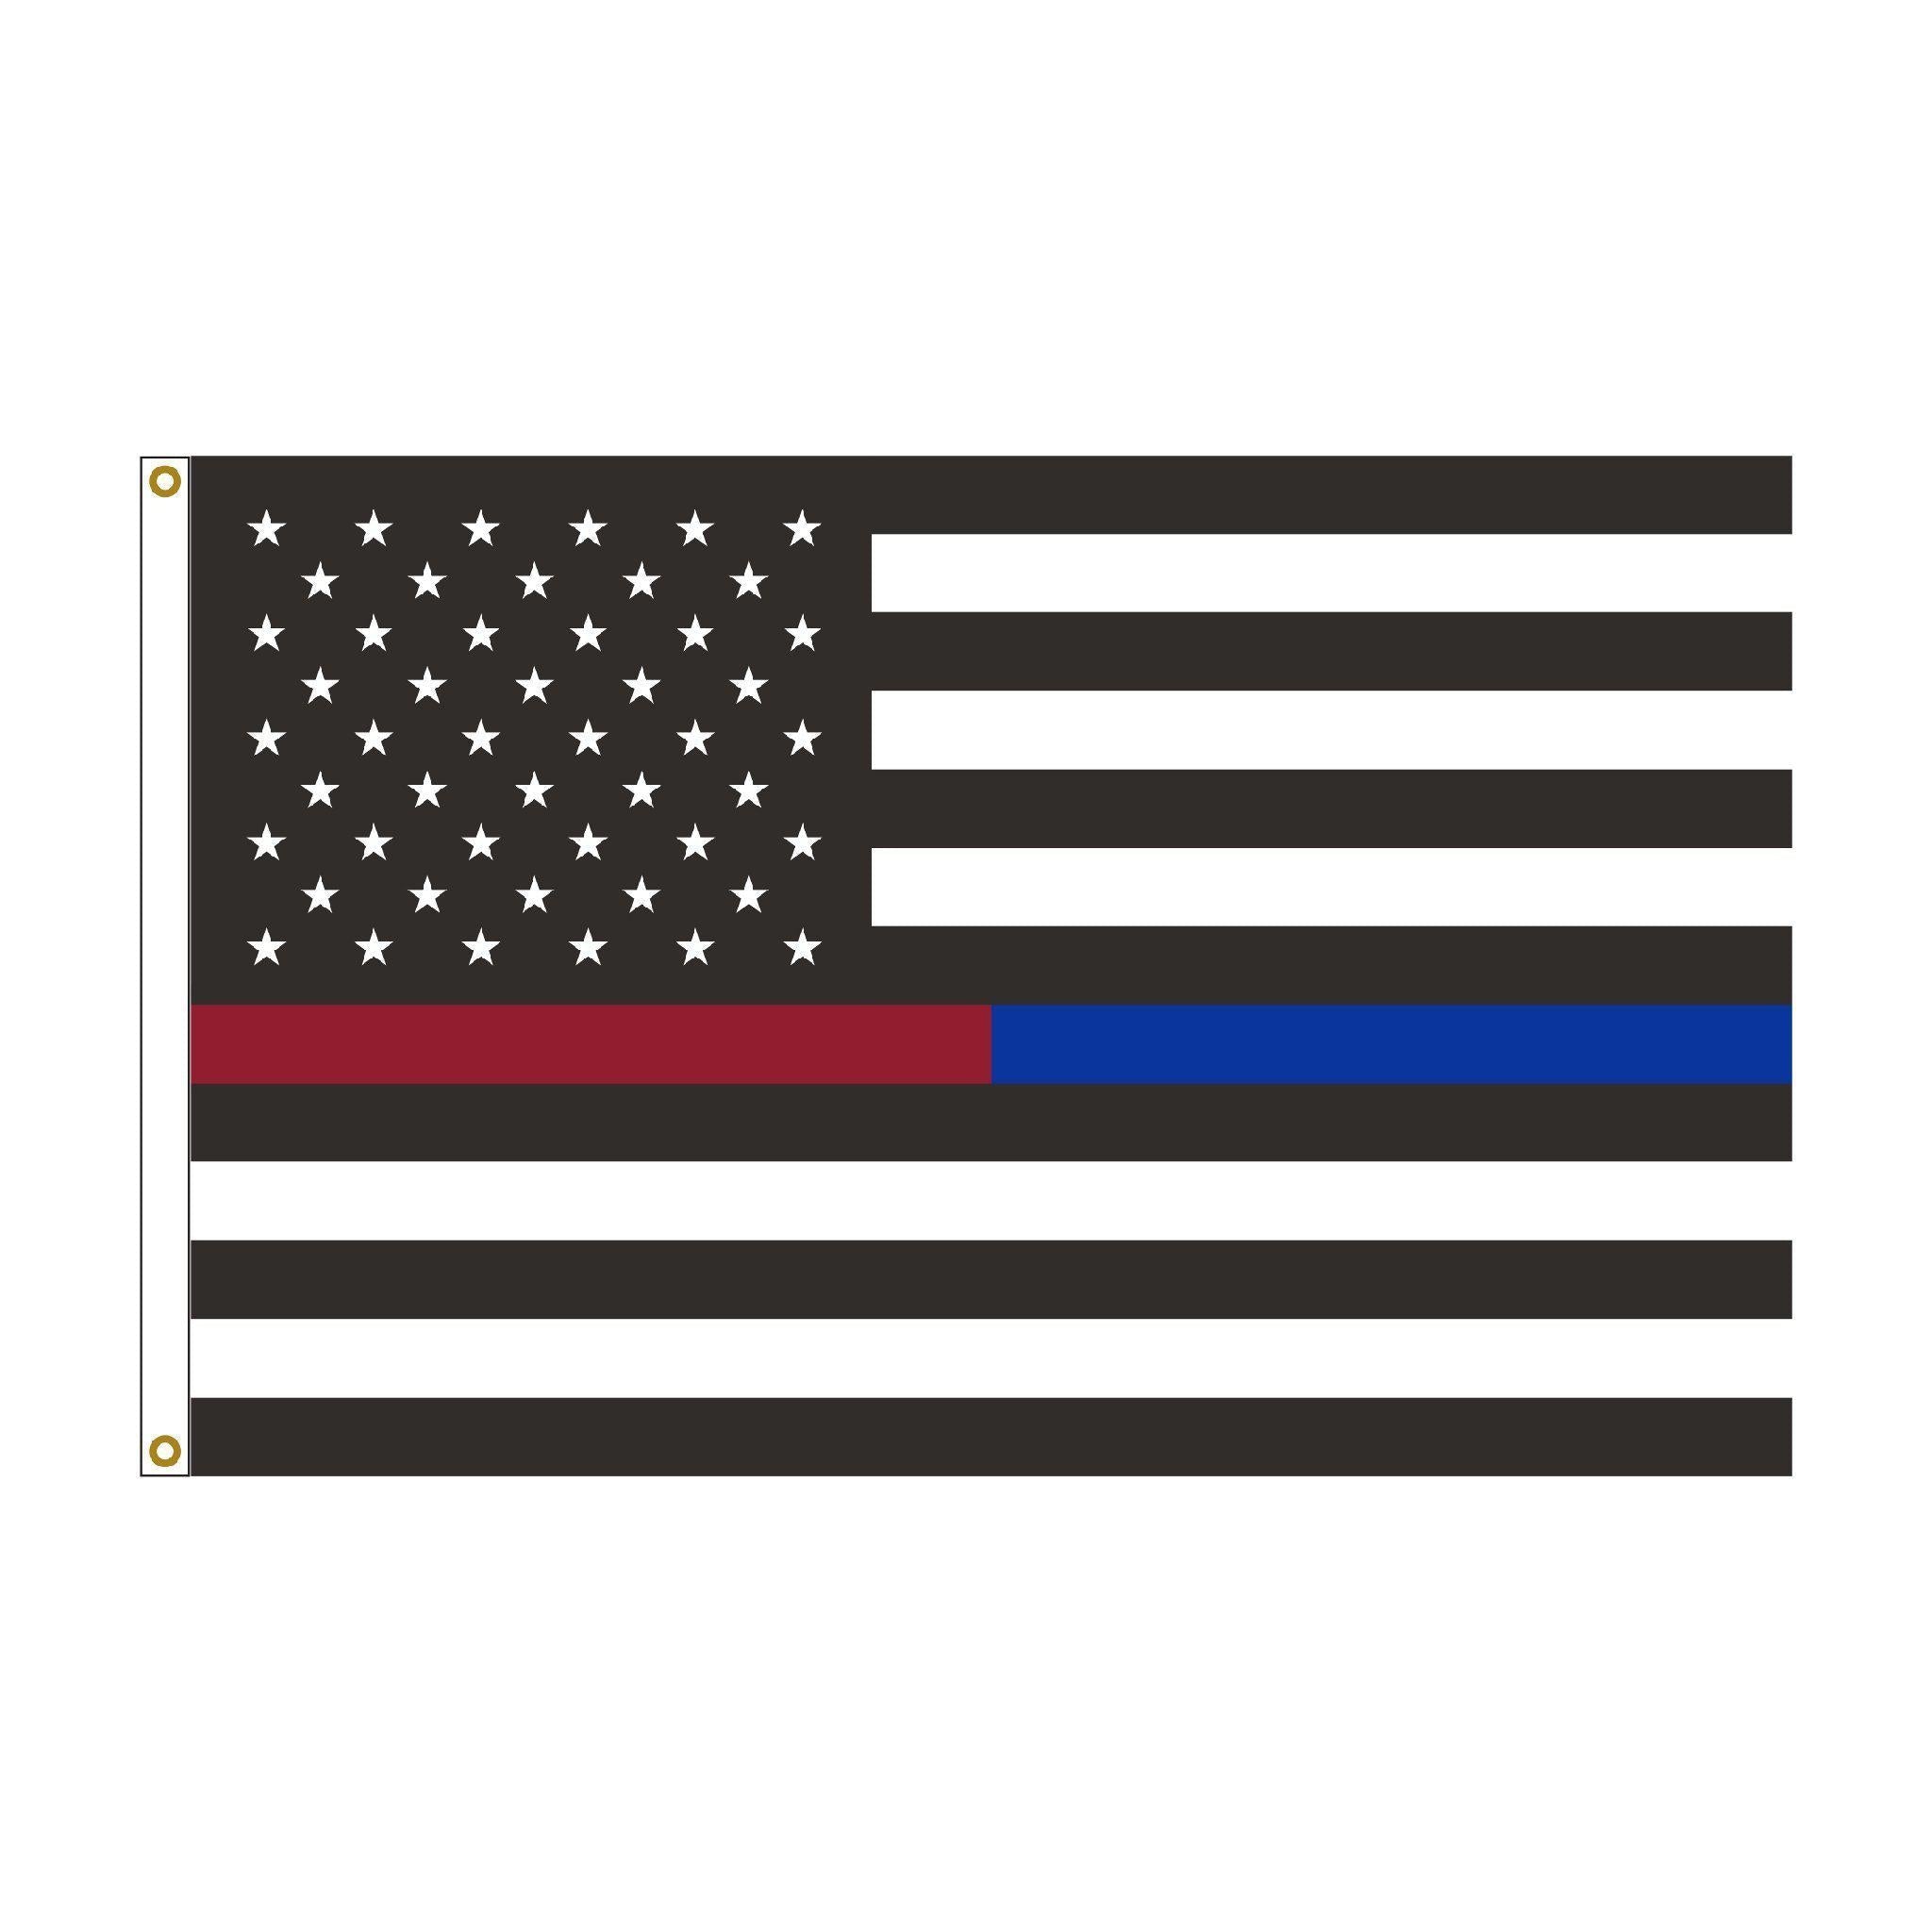 2x3 Thin Red Line & Thin Blue Line U.S. flag to support firefighters and police.